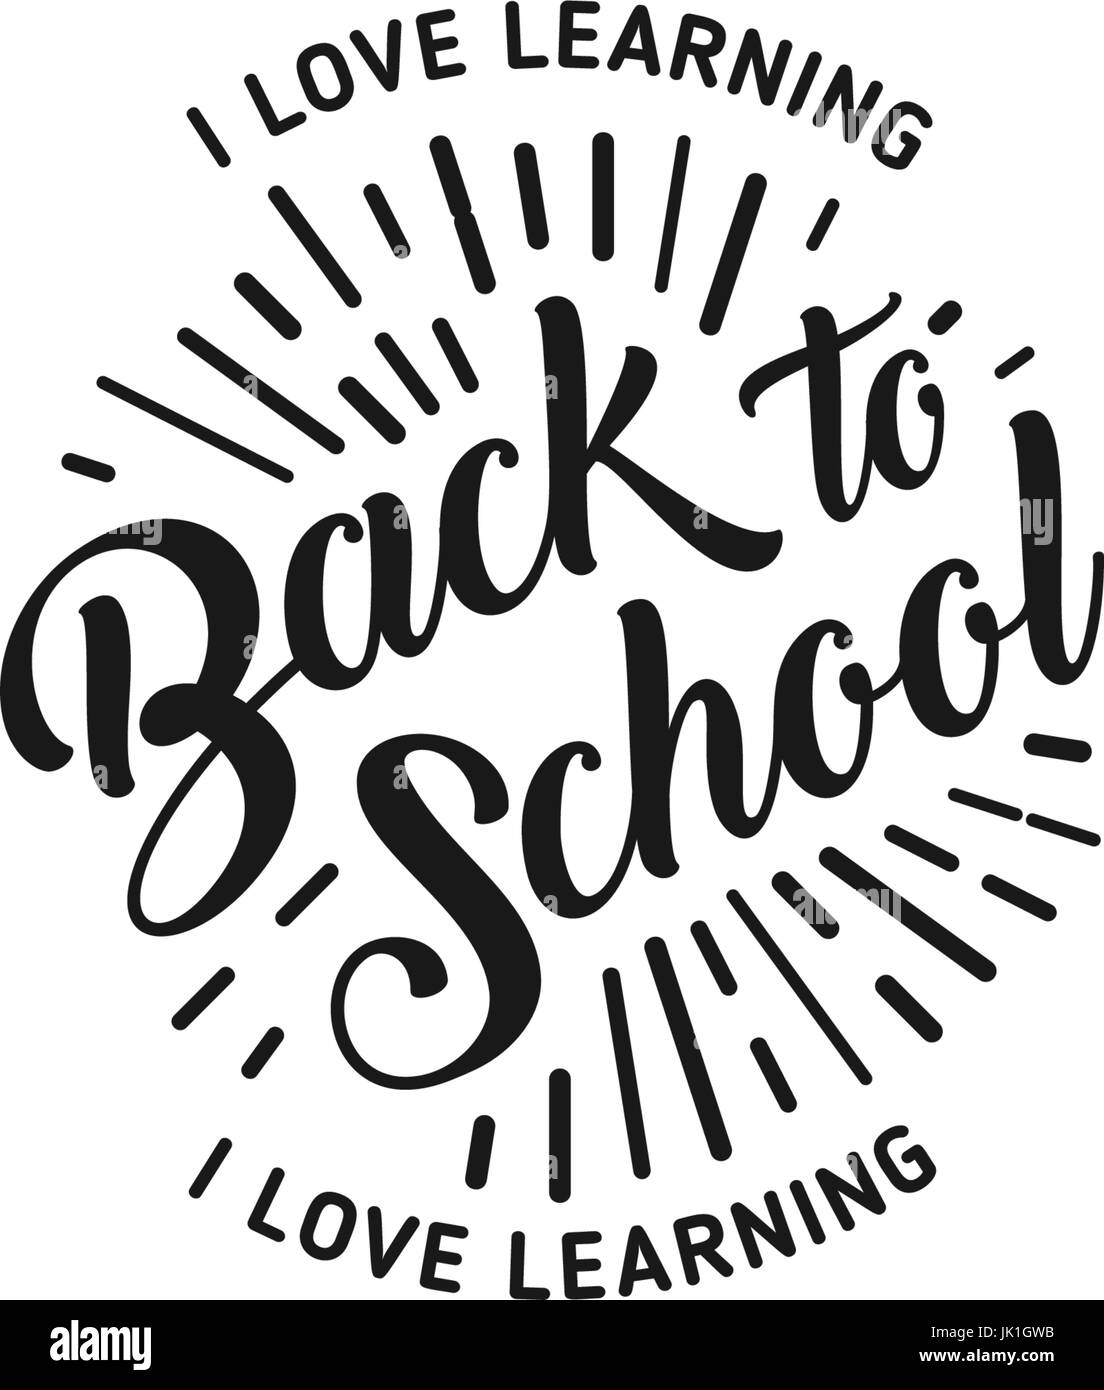 School logo vector. Monochrome vintage style design educational learning sign. Back to school, university, college retro stamp. Black and white education emblem on white background. Stock Vector